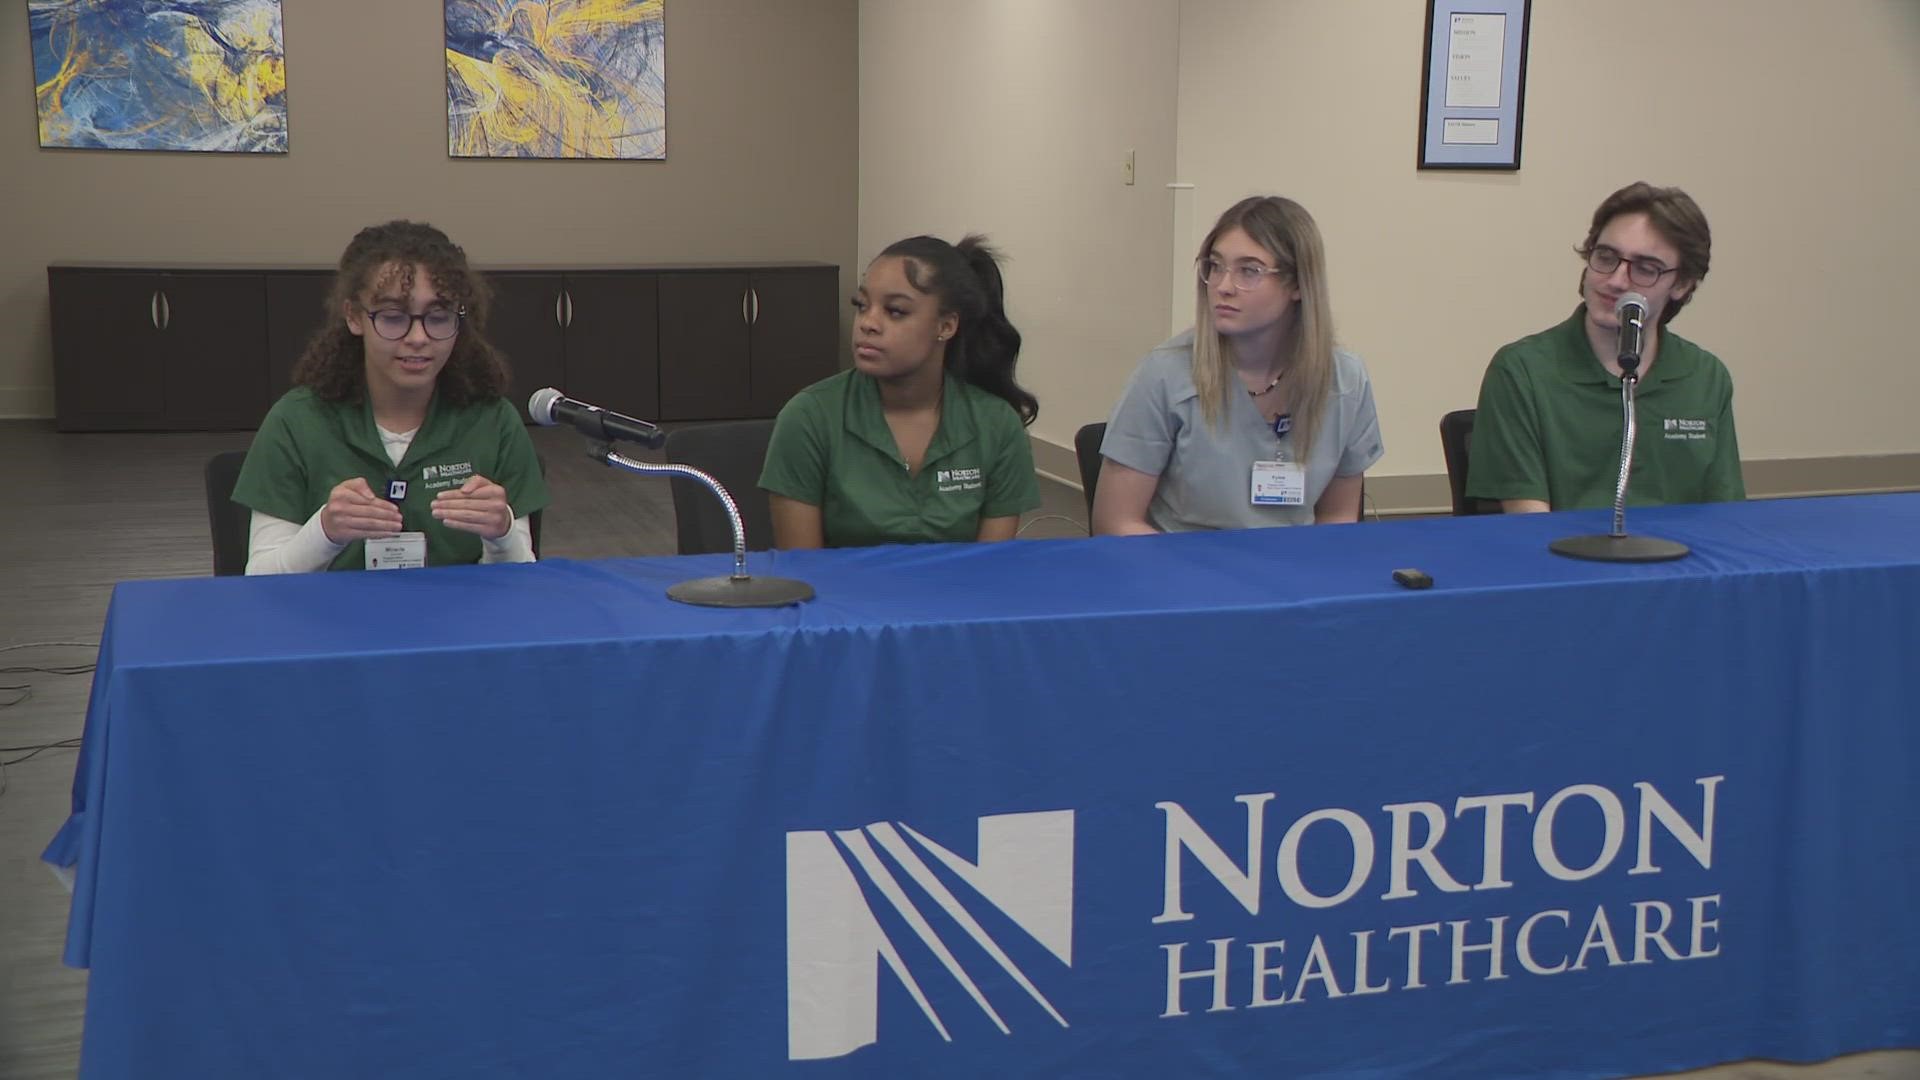 The pathways are designed to allow students to gain a basic understanding of what it takes to work in healthcare as they consider post high school career options.